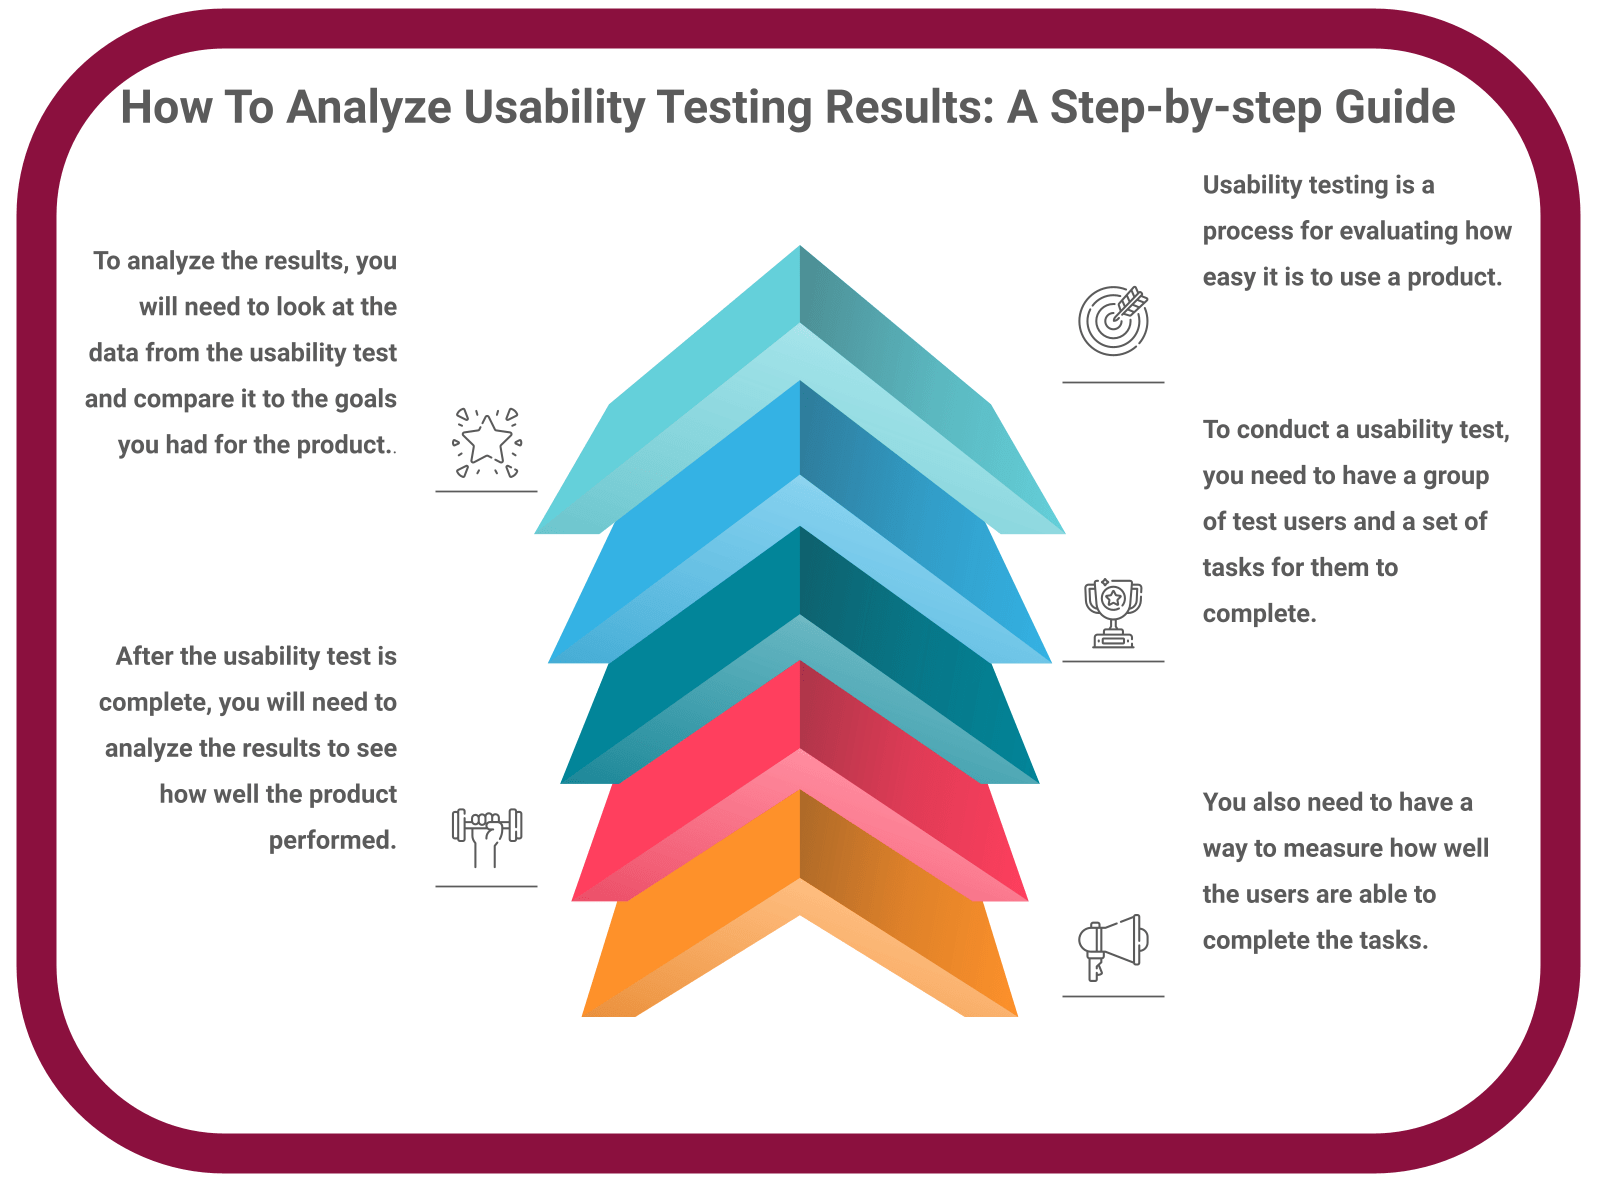 INFOGRAPHIC: How To Analyze Usability Testing Results: A Step-by-step Guide - Poll the People